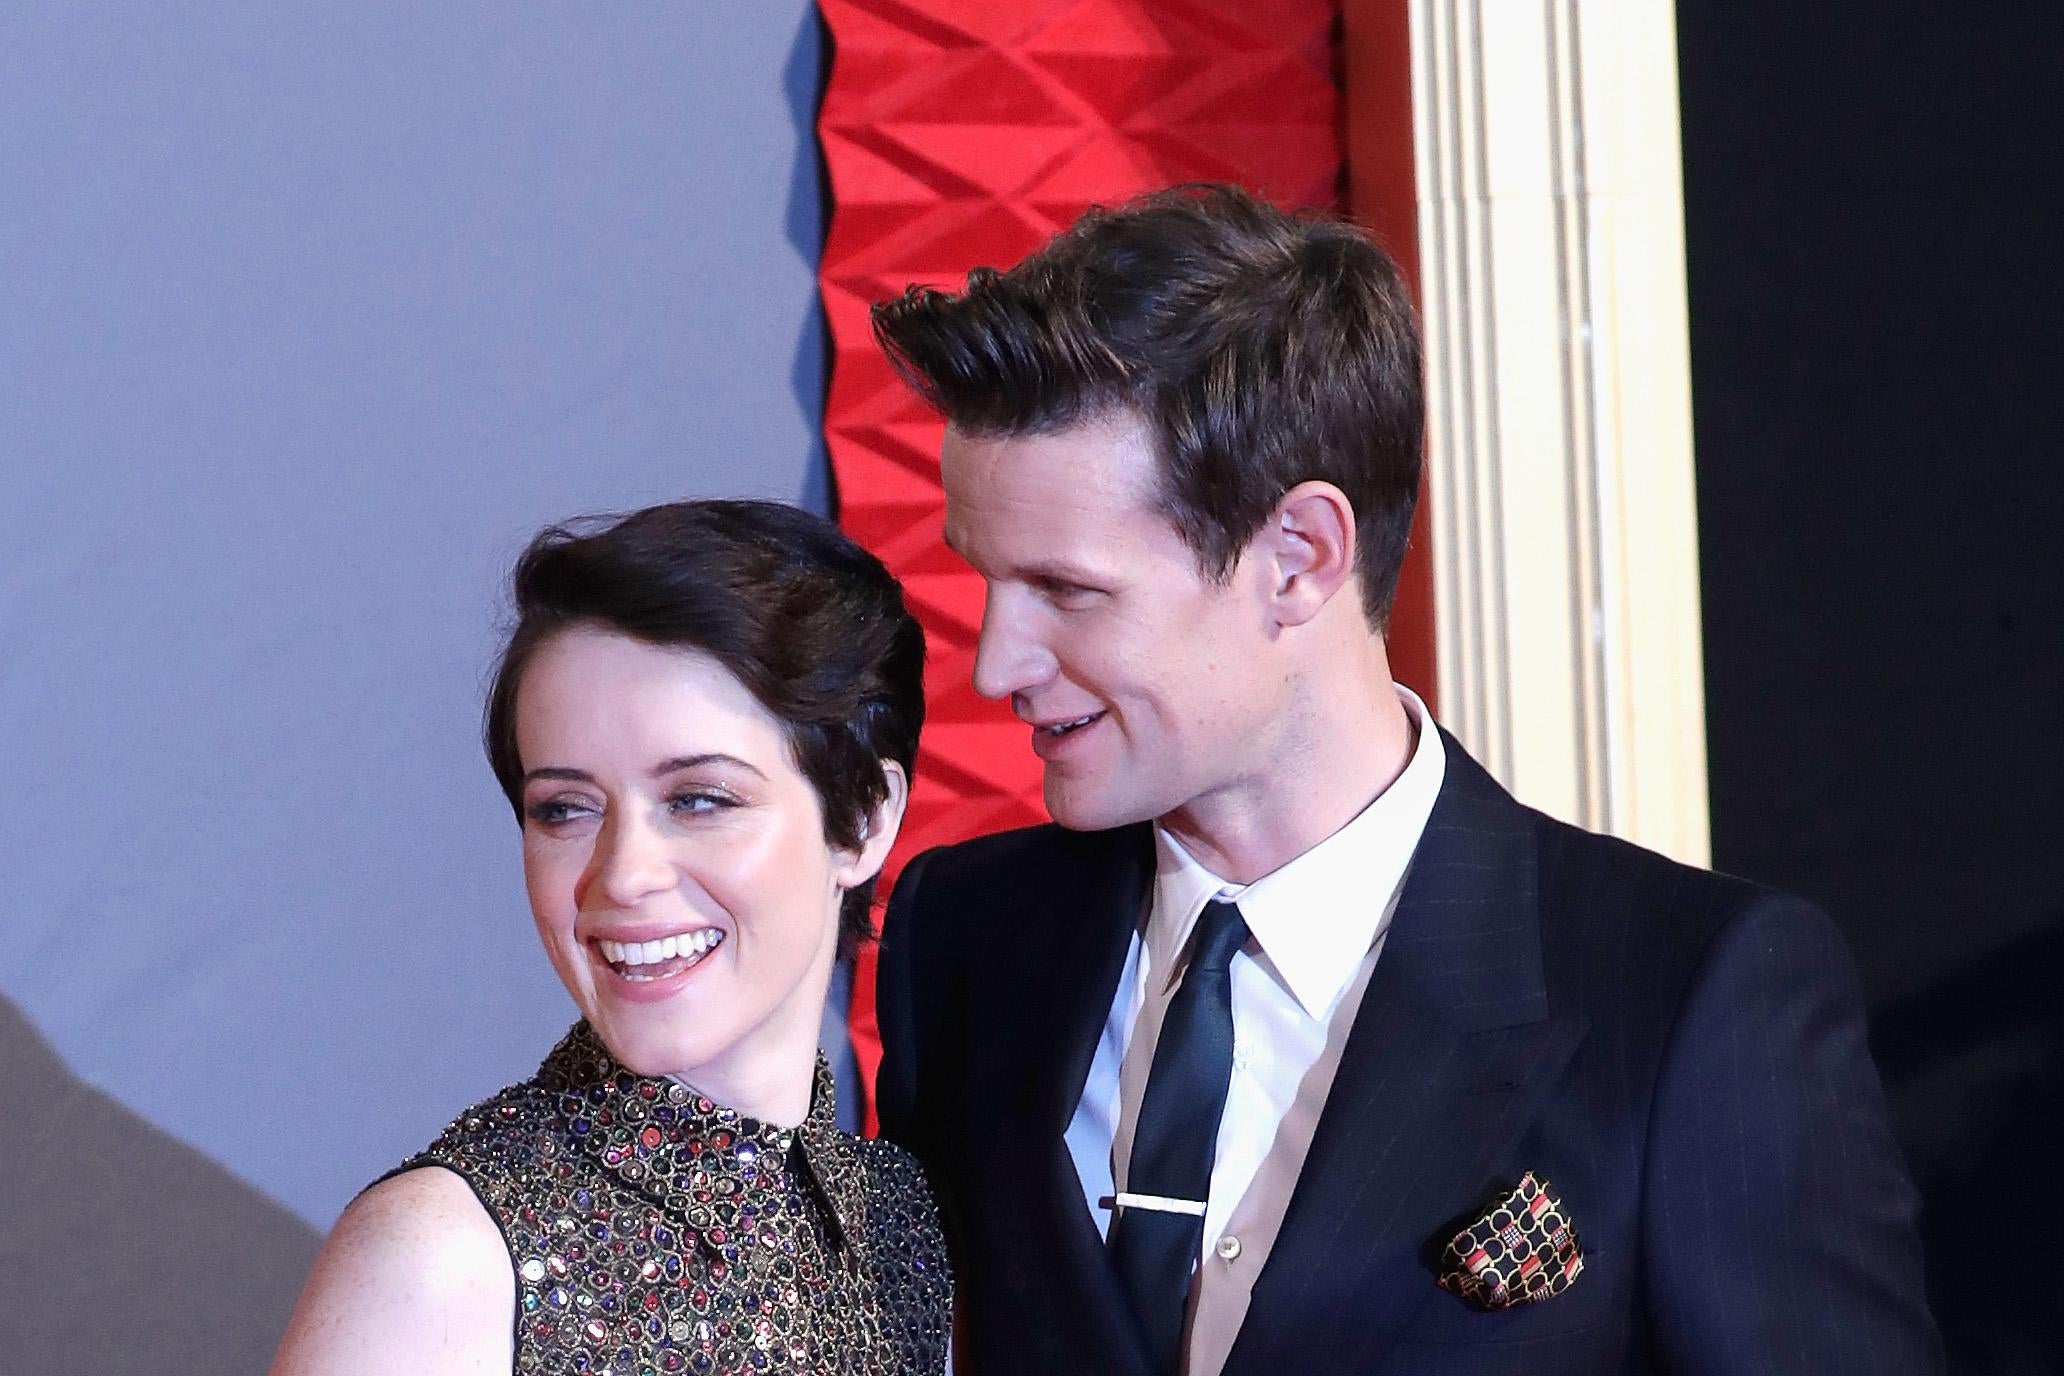 Claire Foy was paid less than co-star Matt Smith for Netflix's 'The Crown